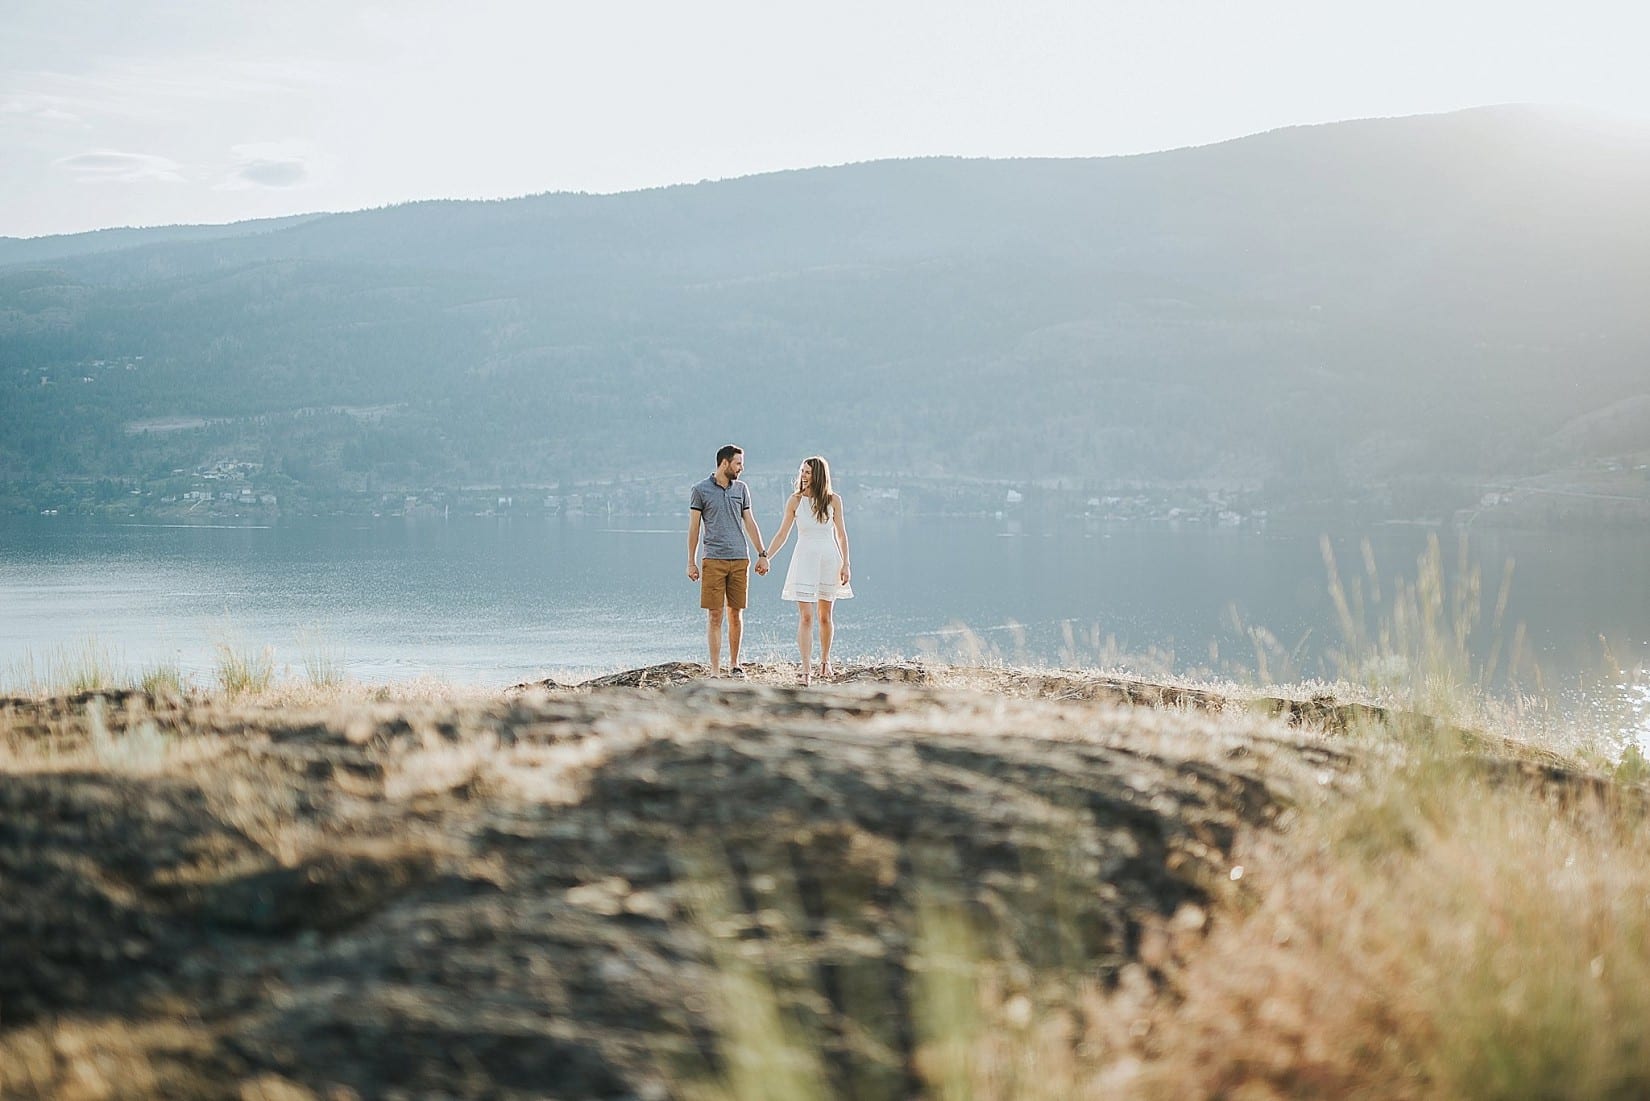 Best of Kelowna Photographers Josh and Carly shooting this Knox mountain Engagement Photography session!